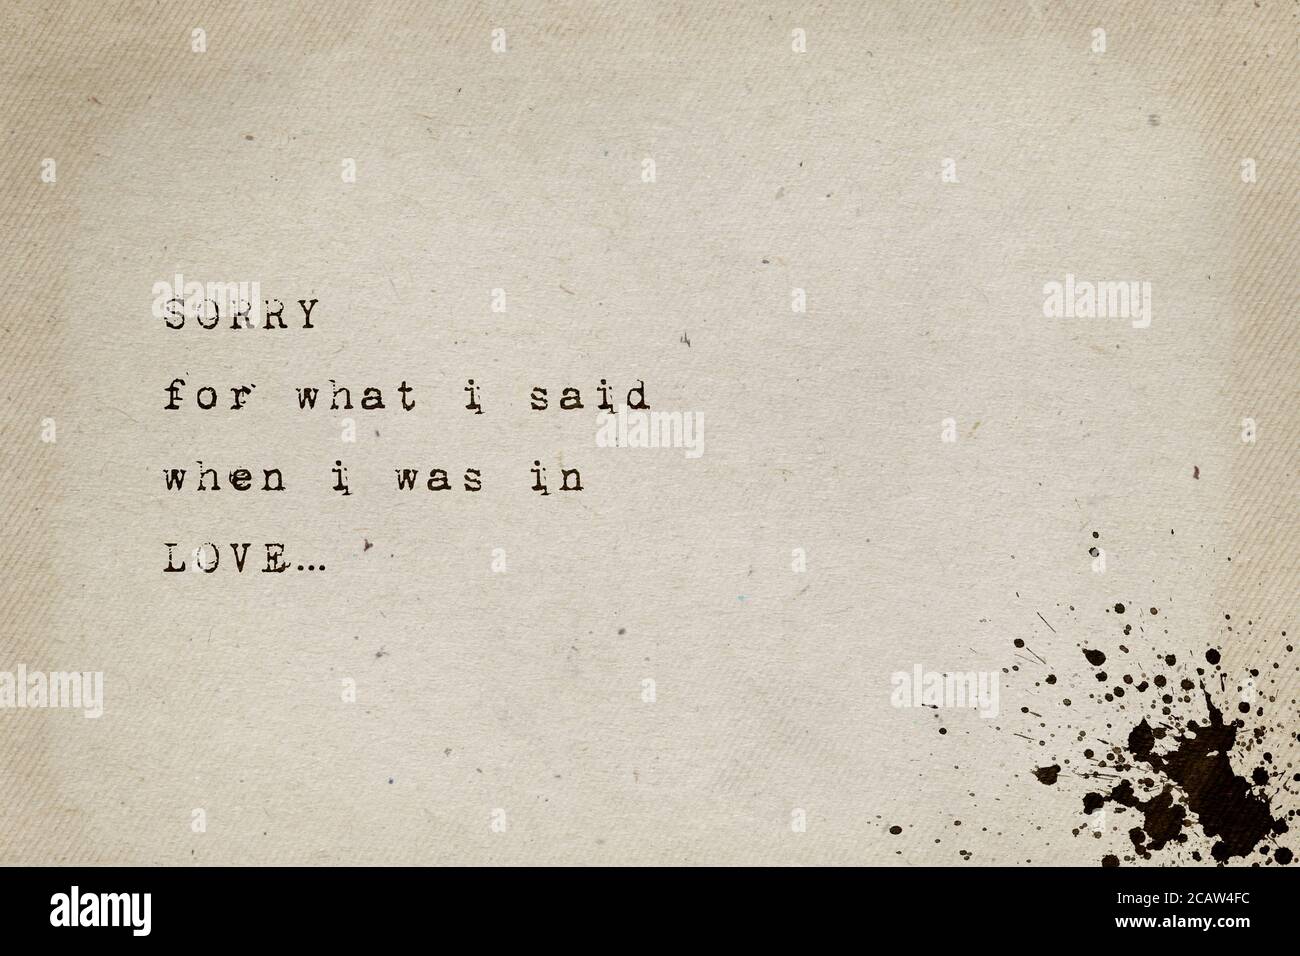 Sorry for what i said when i was in love. Minimalist text art, conceptual illustration, typewriter font style written on old paper texture. Life drama Stock Photo